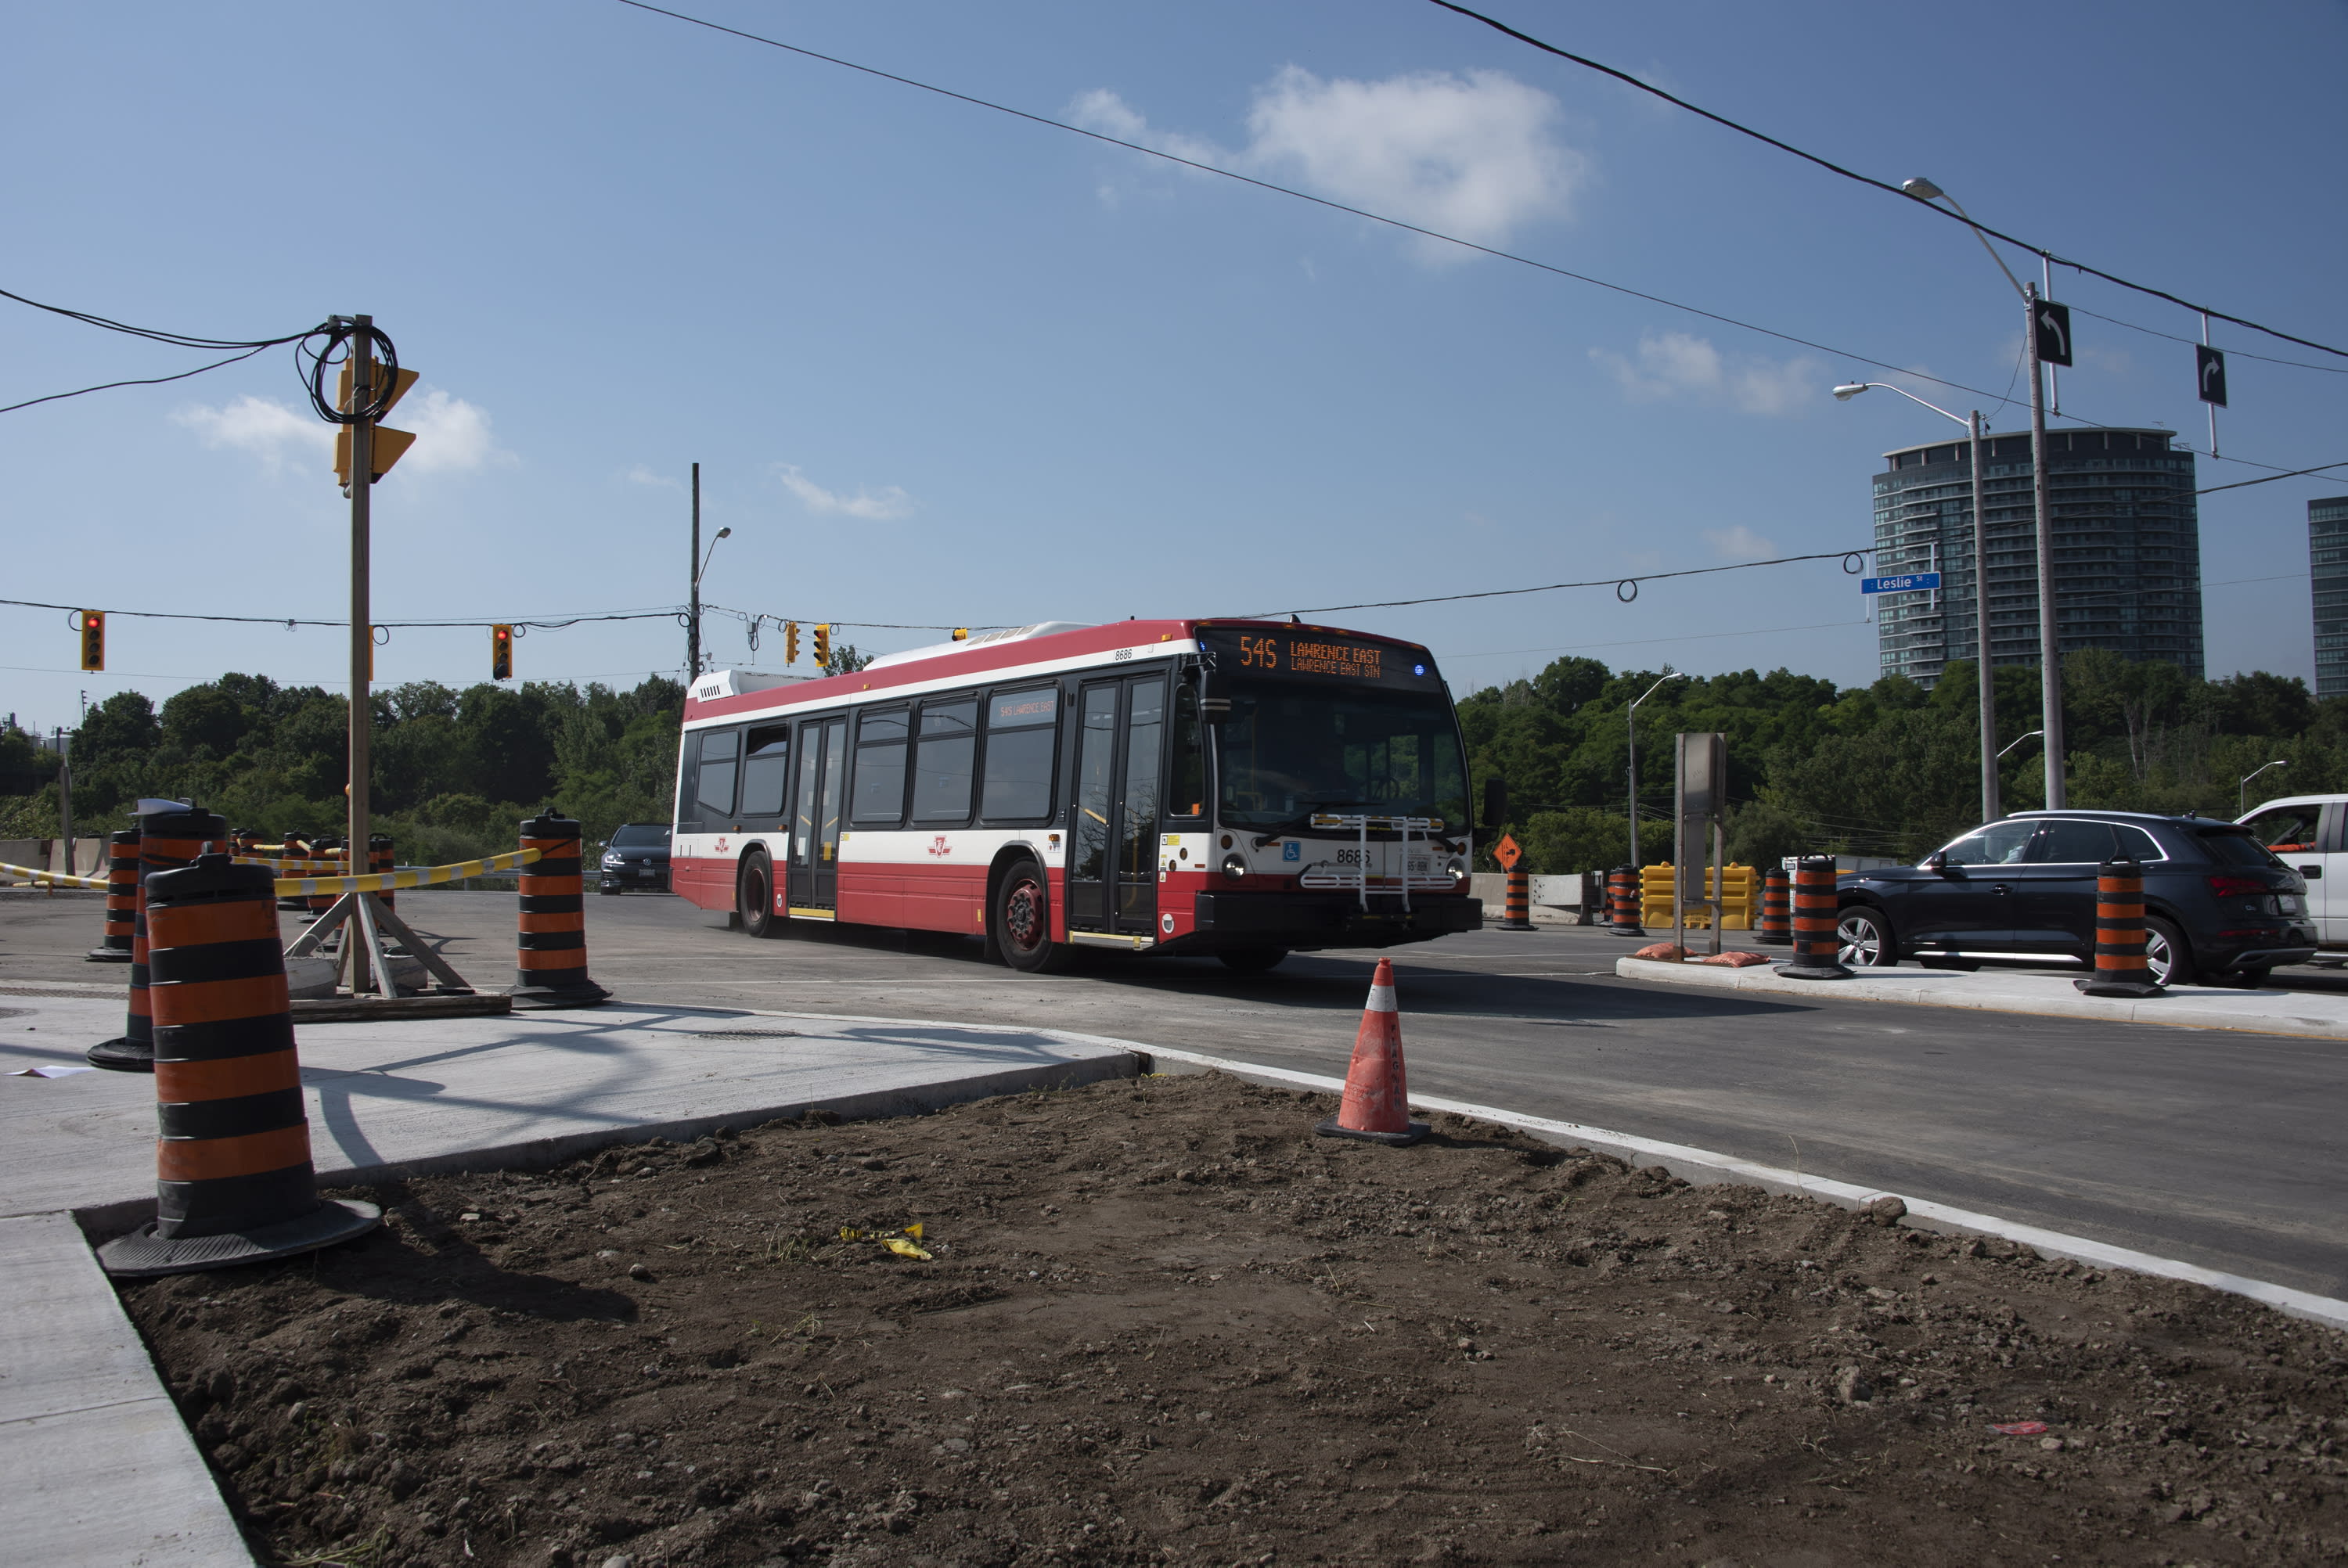 A TTC bus travels through the Leslie Street intersection.